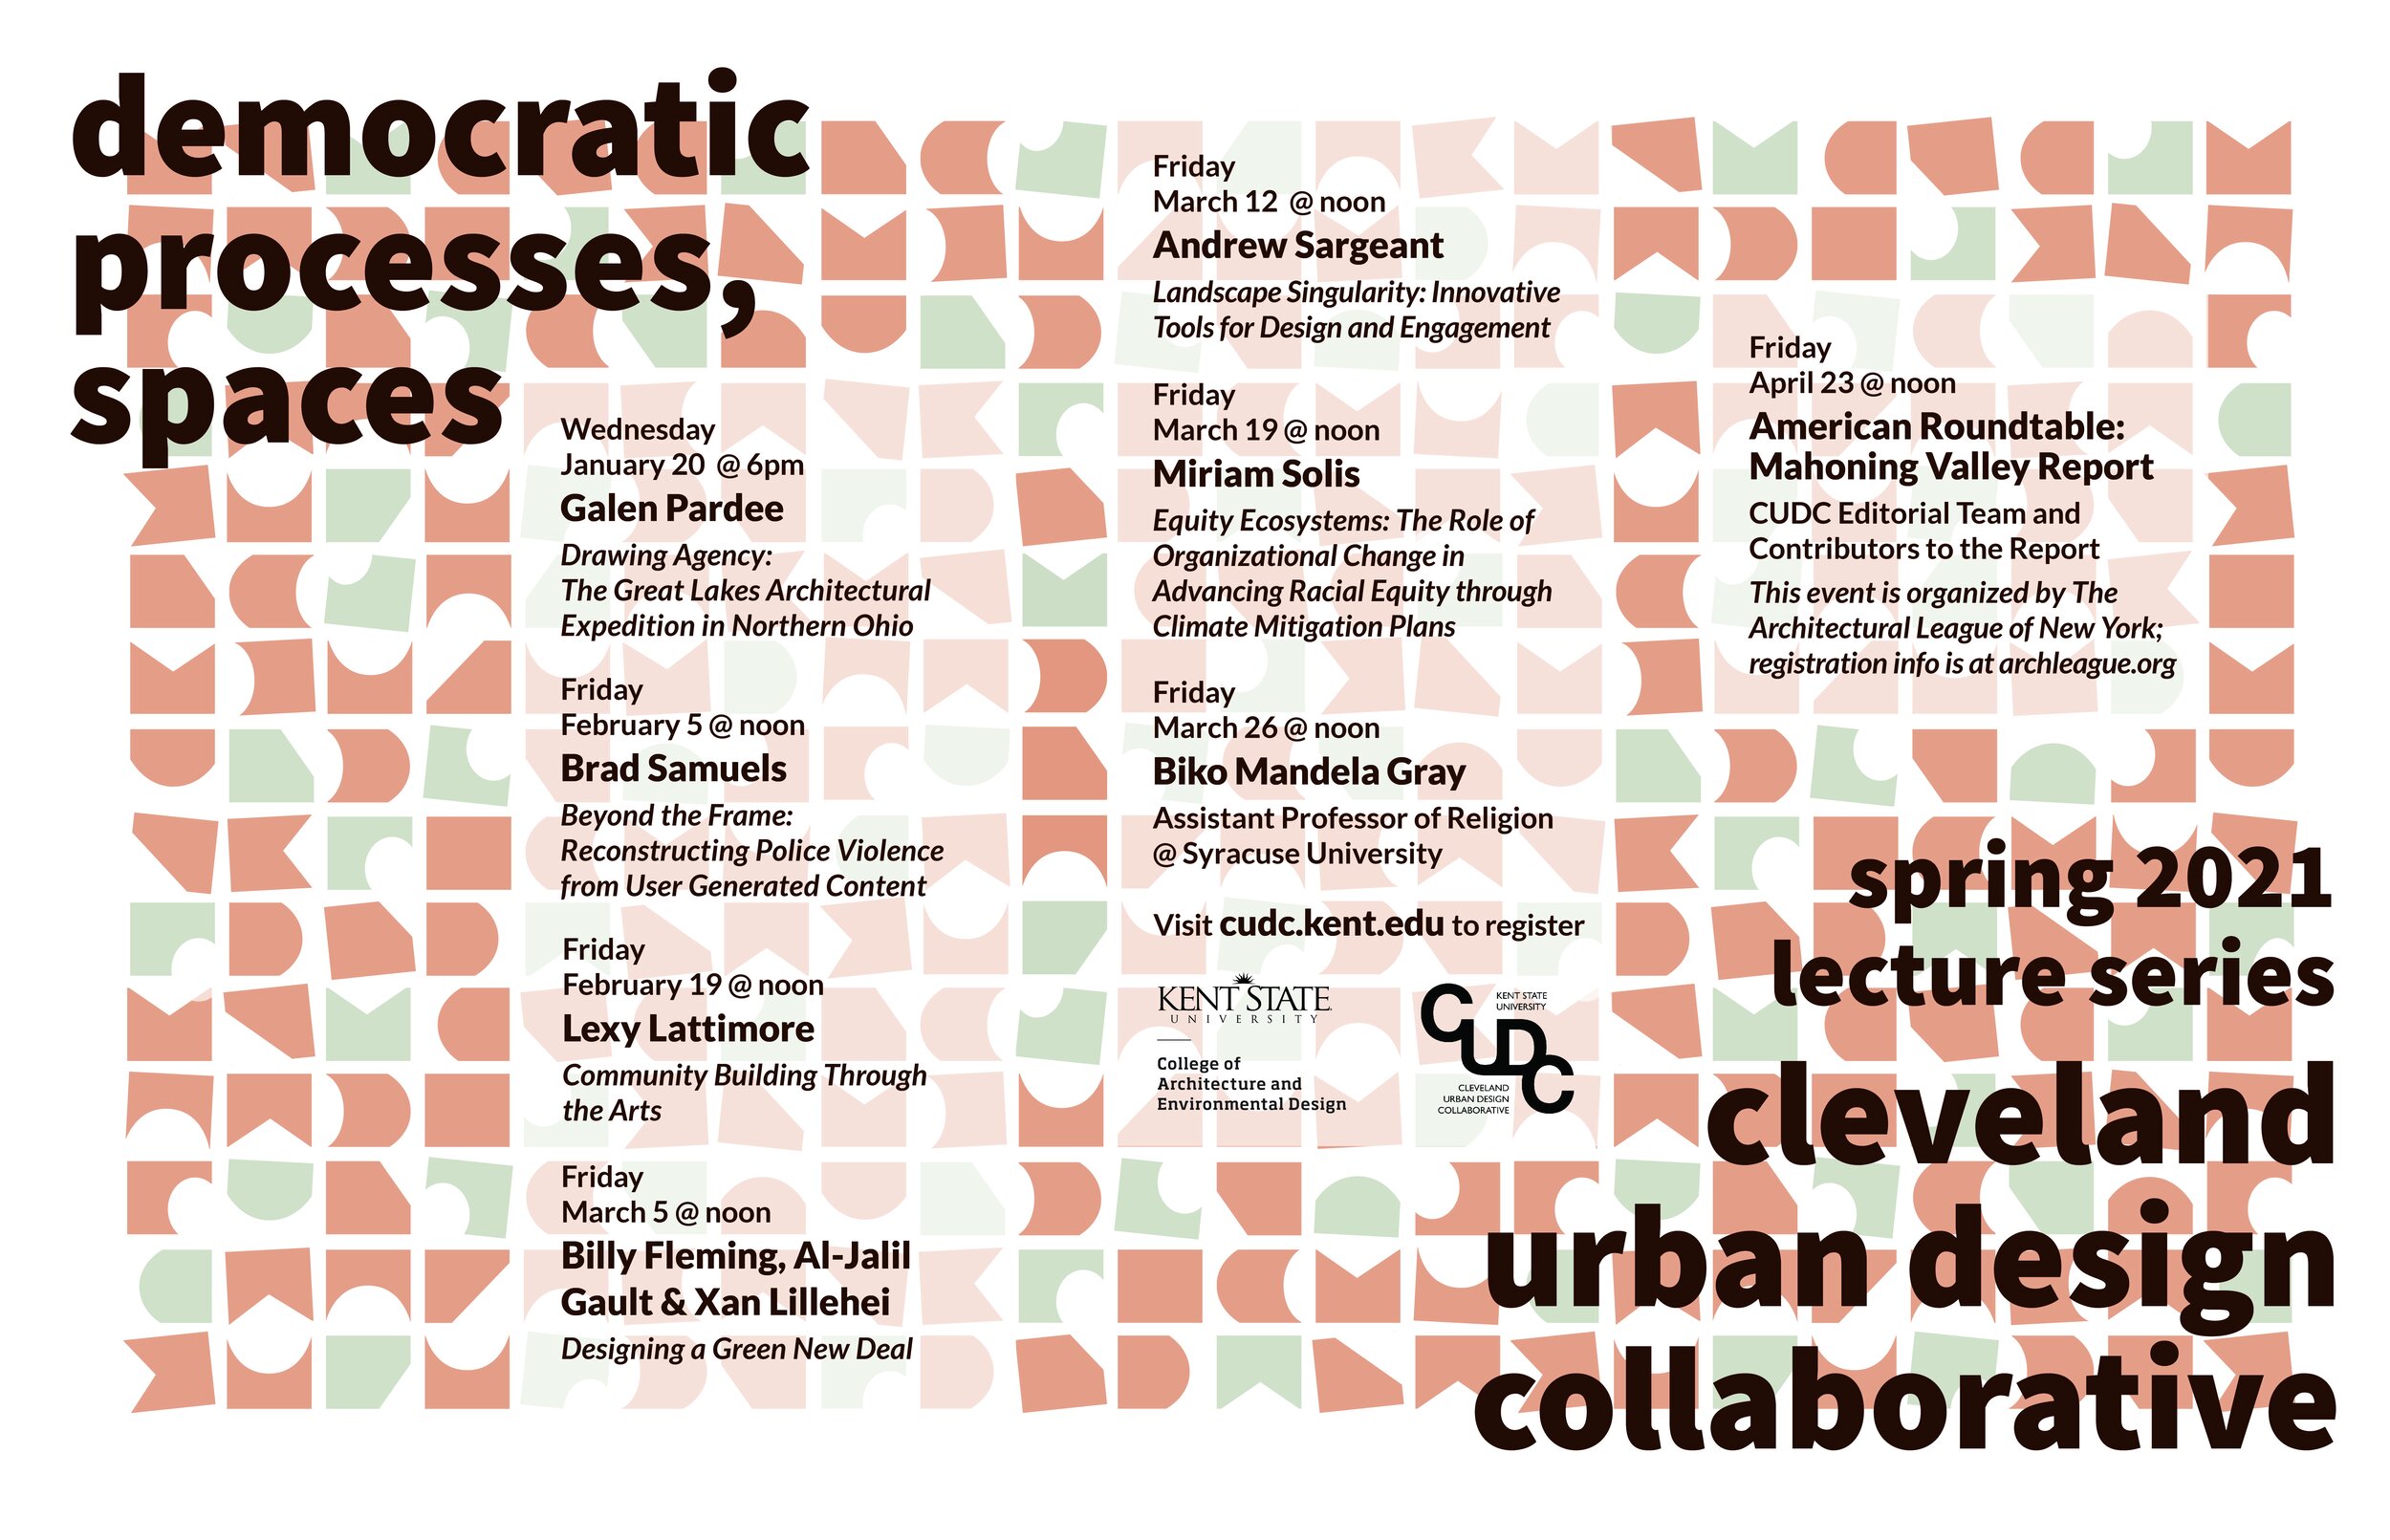 spring 2021_CUDC lecture series poster_v8-01.jpg